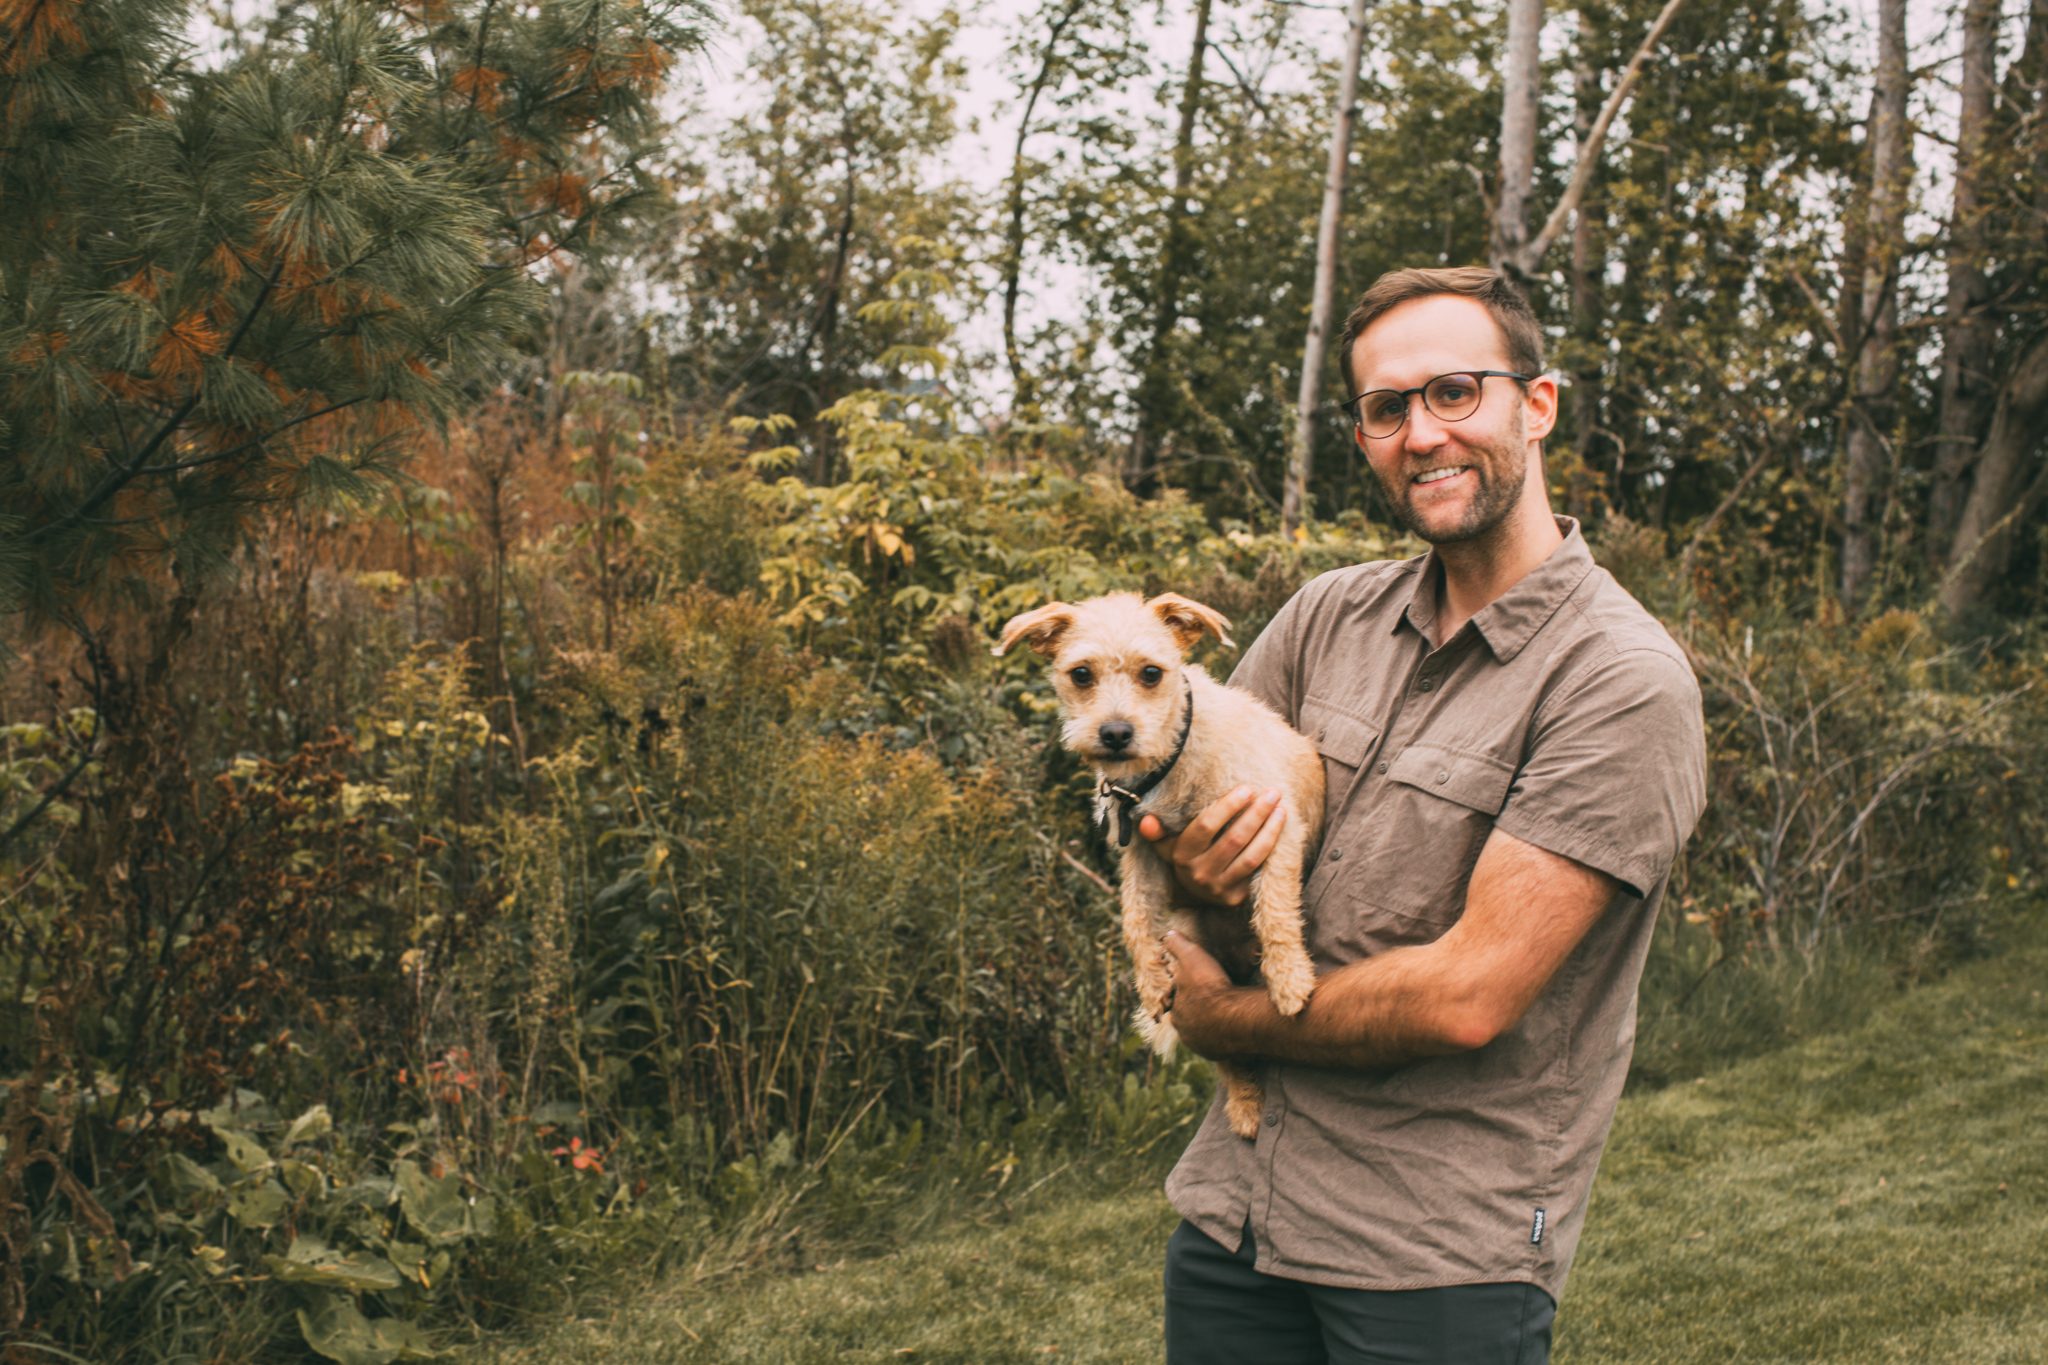 A man pictured holding a small dog in front of a grassy, wooded field. The man is wearing a light brown short-sleeved shirt and jeans.